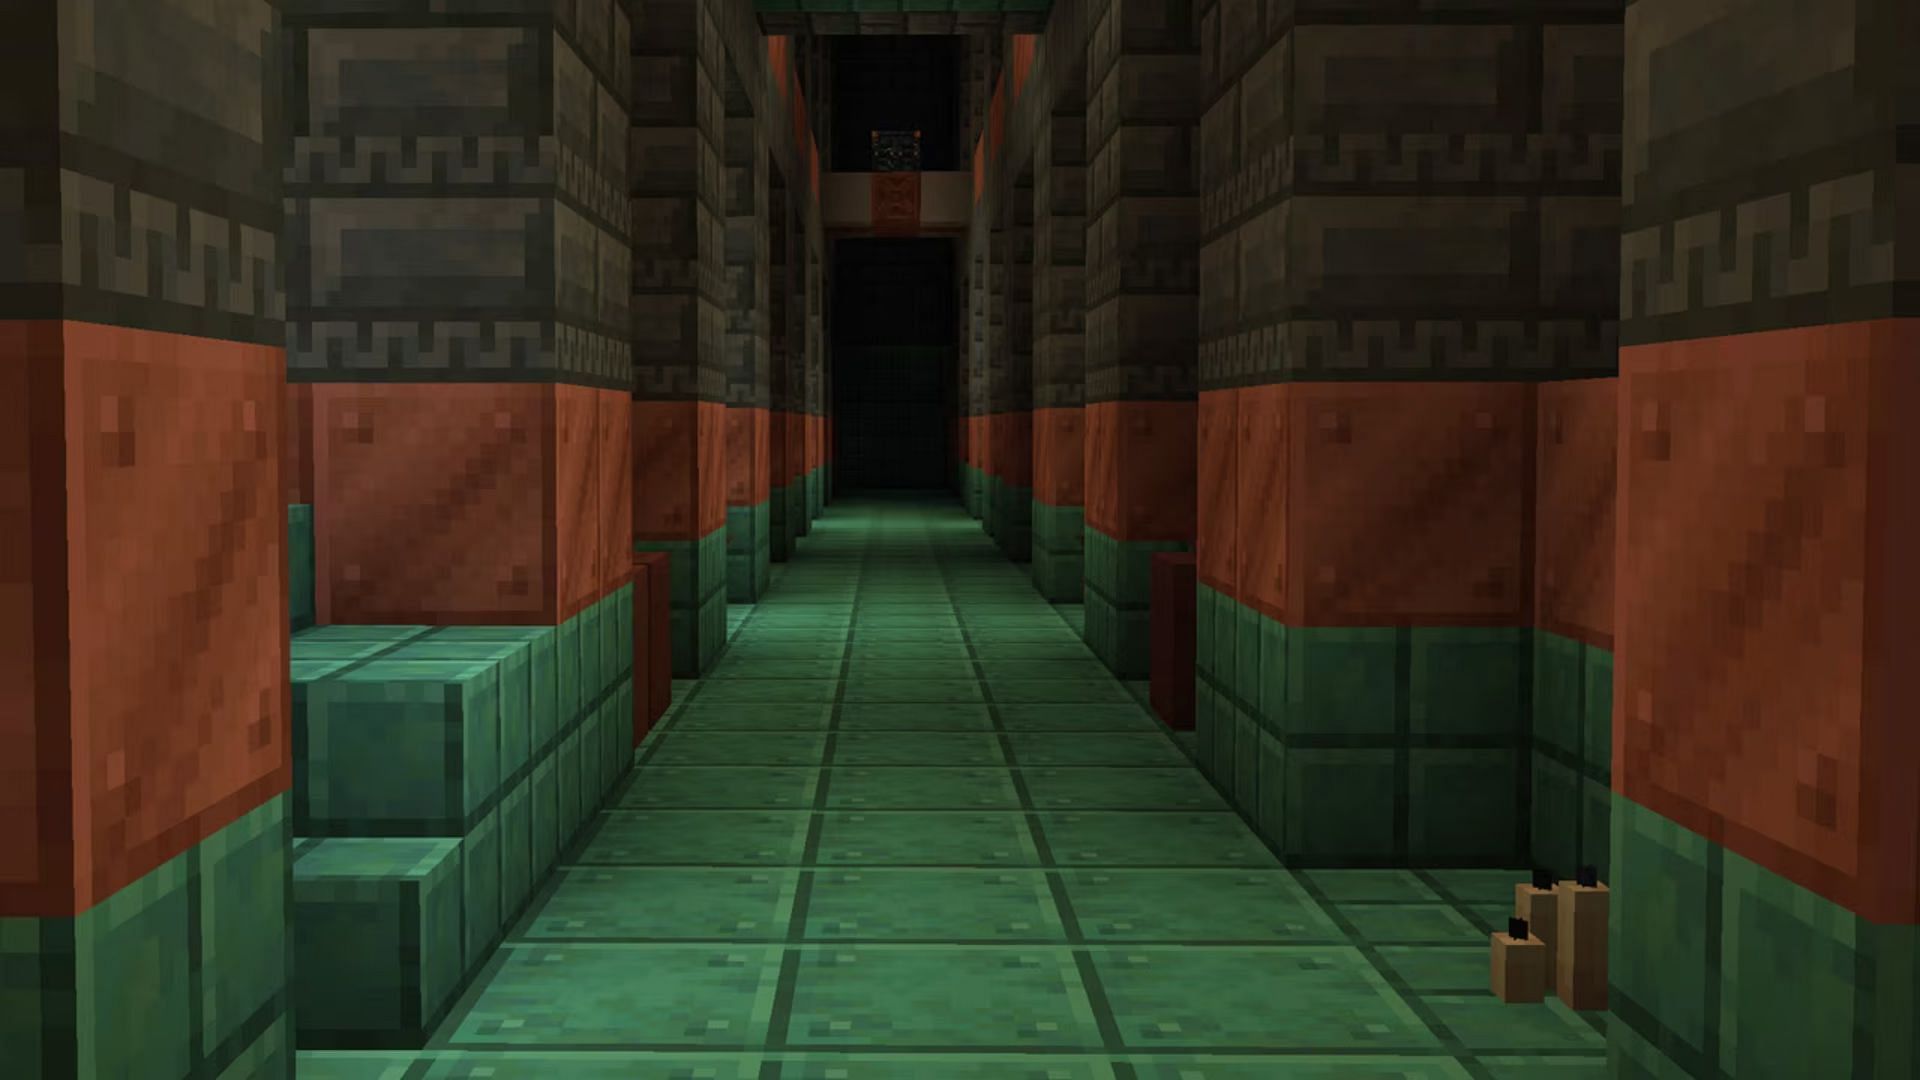 The trial chambers in Minecraft (image via Mojang Studios)